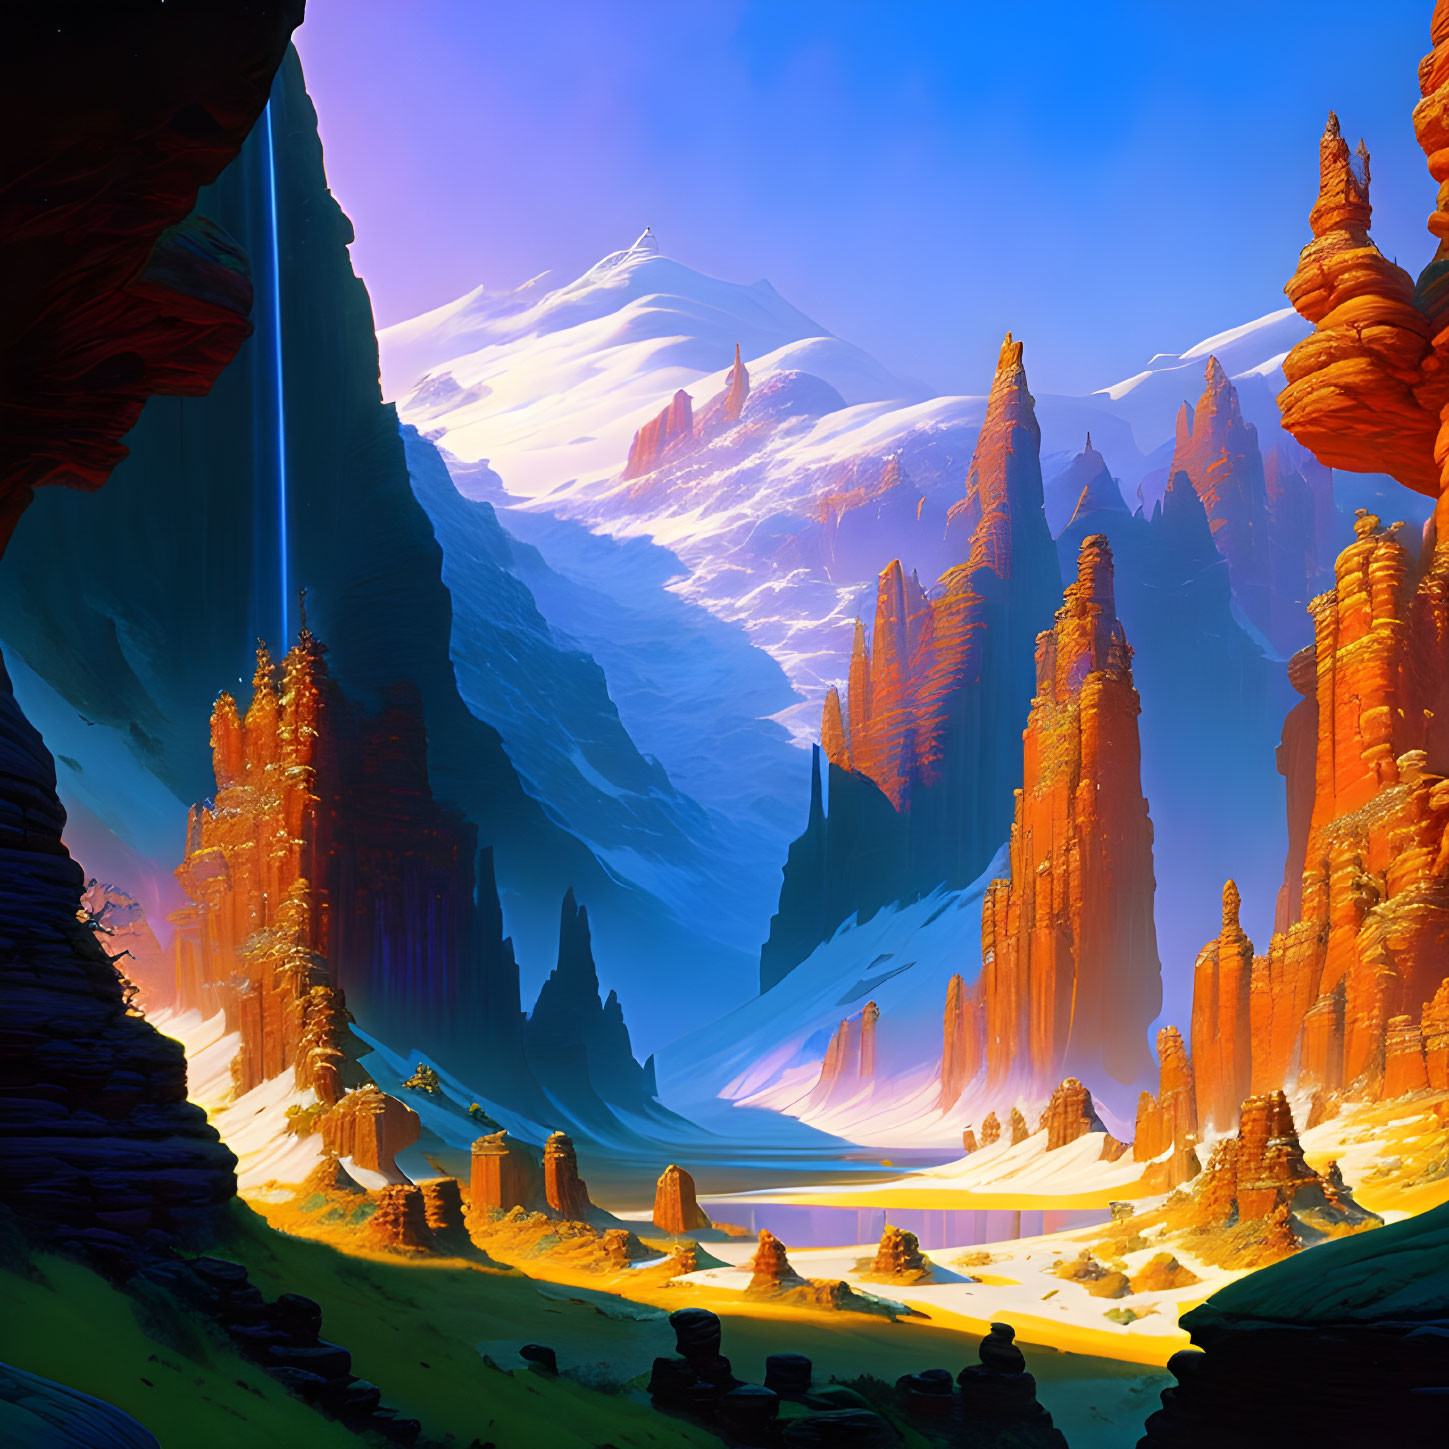 Fantastical mountain landscape with red rock formations and blue sky